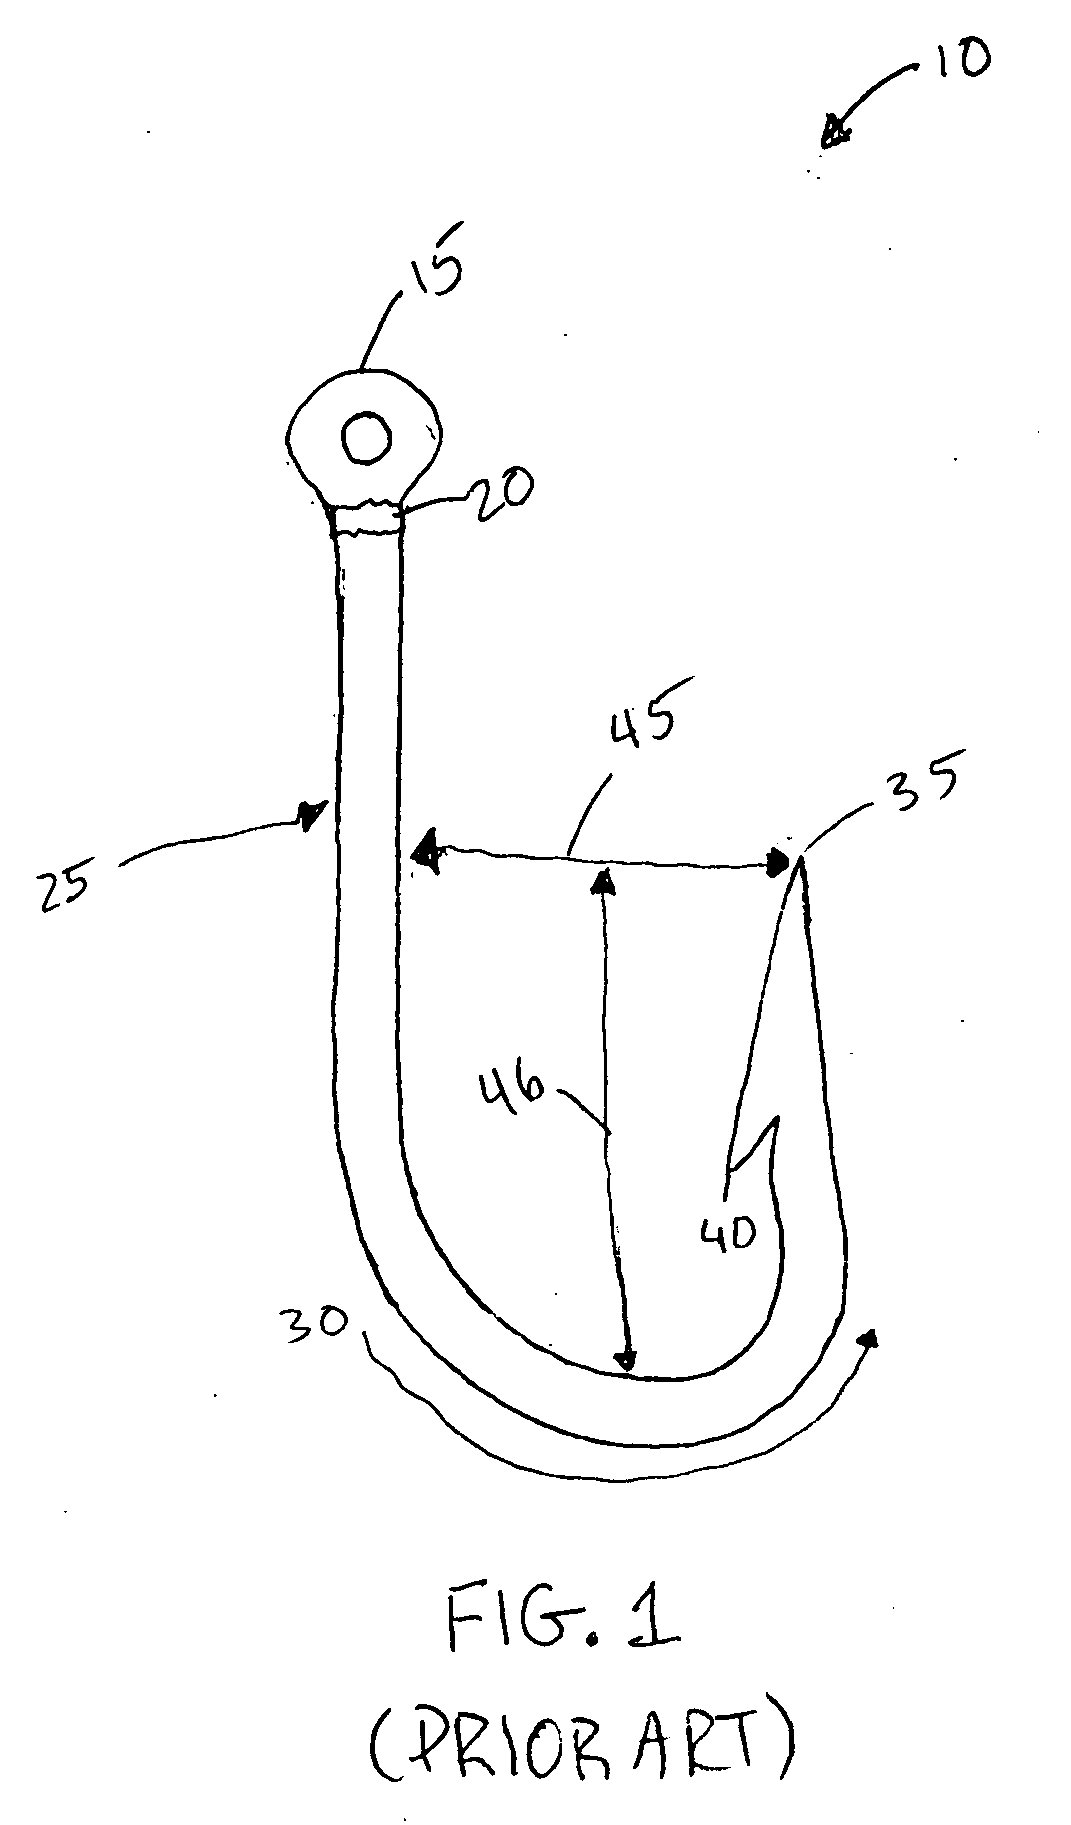 Fish hook and related methods